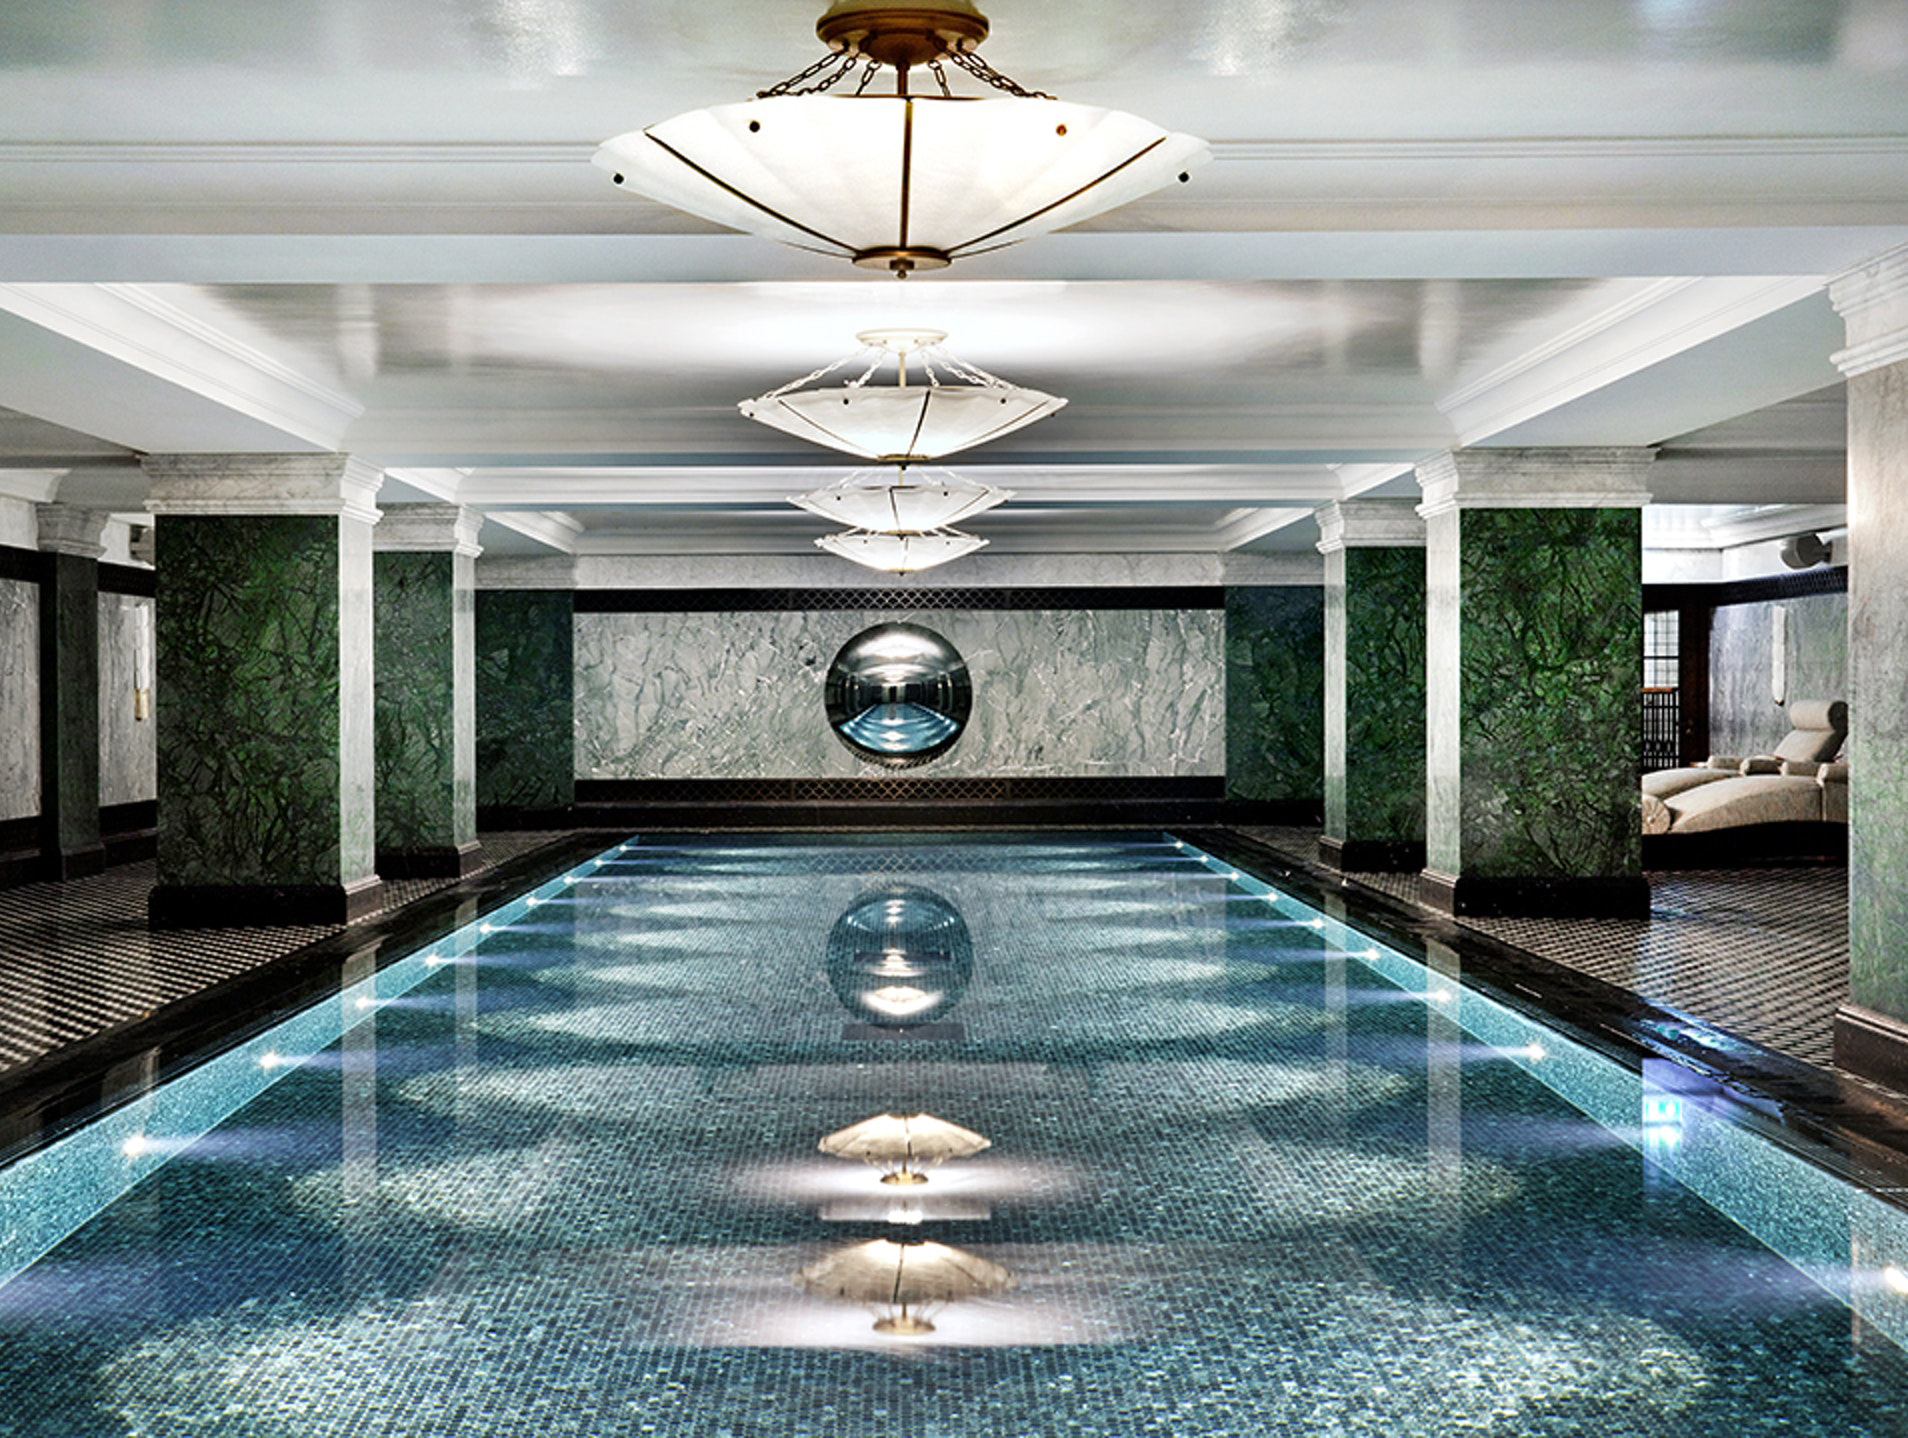 The Ned London spa pool with blue tiles and marble pillars